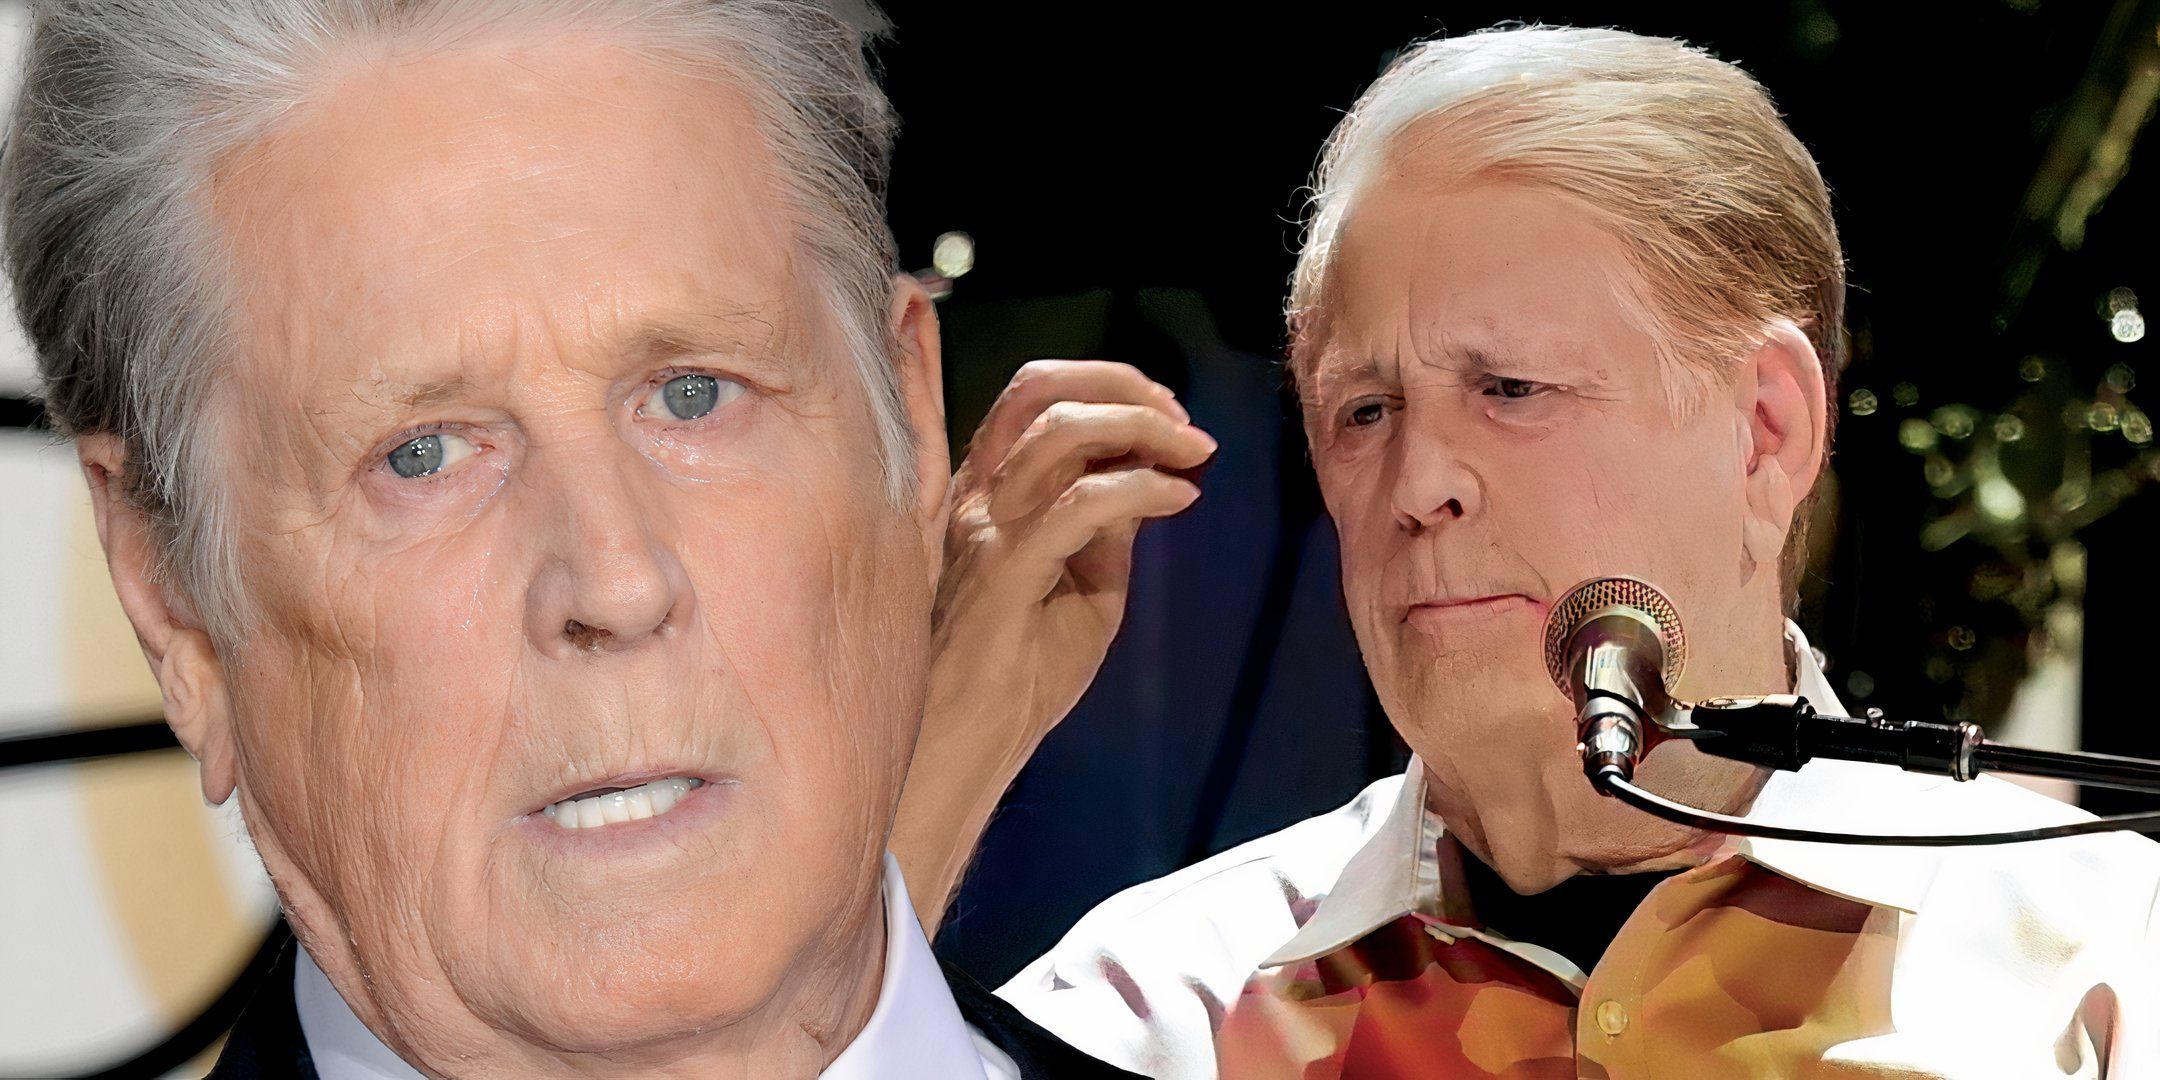 Beach Boys Co-Founder Brian Wilson's Conservatorship Granted Due To Cognitive Decline